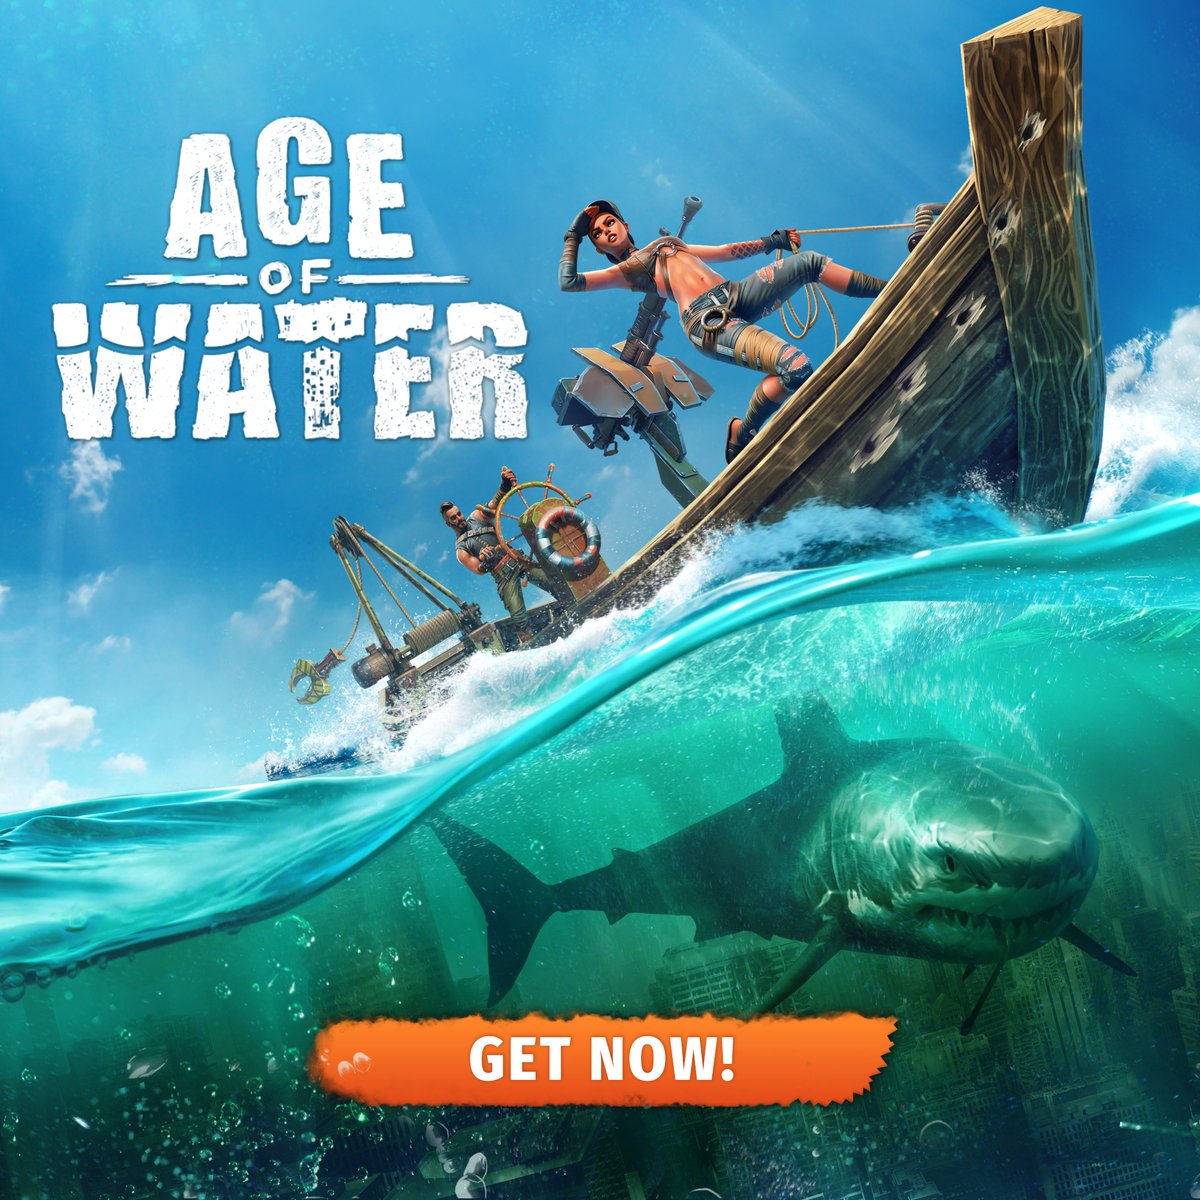 Starting up a quick #Sponsored peak at the up coming @ageofwater_game. Become a sea captain on a post-apocalyptic Earth completely covered in water and go on an adventure in a huge open world. Get it Here: bit.ly/BurkeAOW Watch Here: Twitch.tv/burkeblack